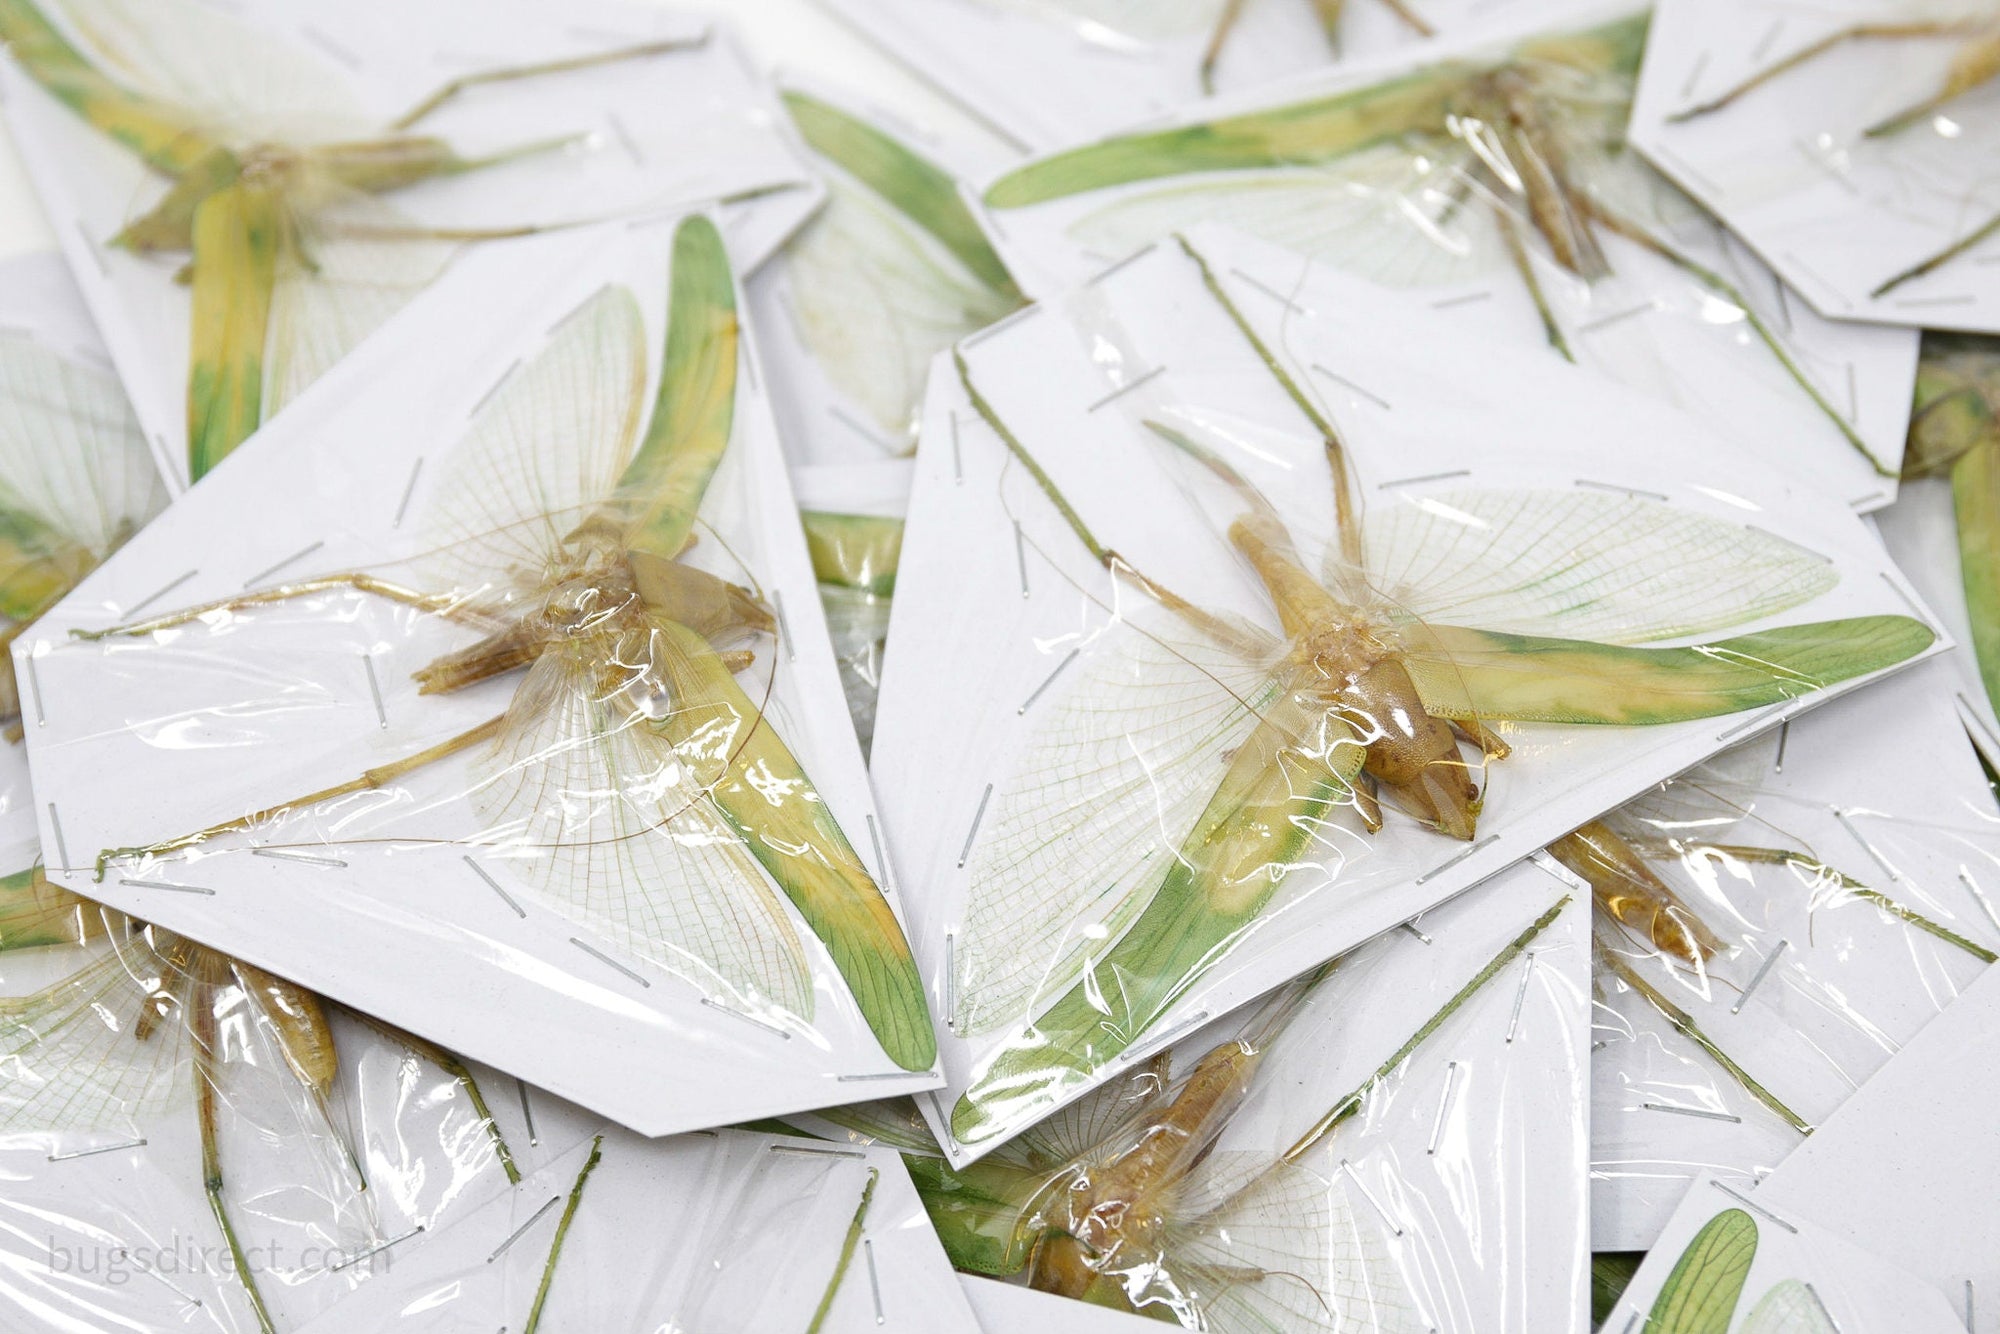 Pair of Green Leaf Katydids 4 Inch Wingspan (Orthoptera) Spread Specimens A1 Quality Real Insect Entomology